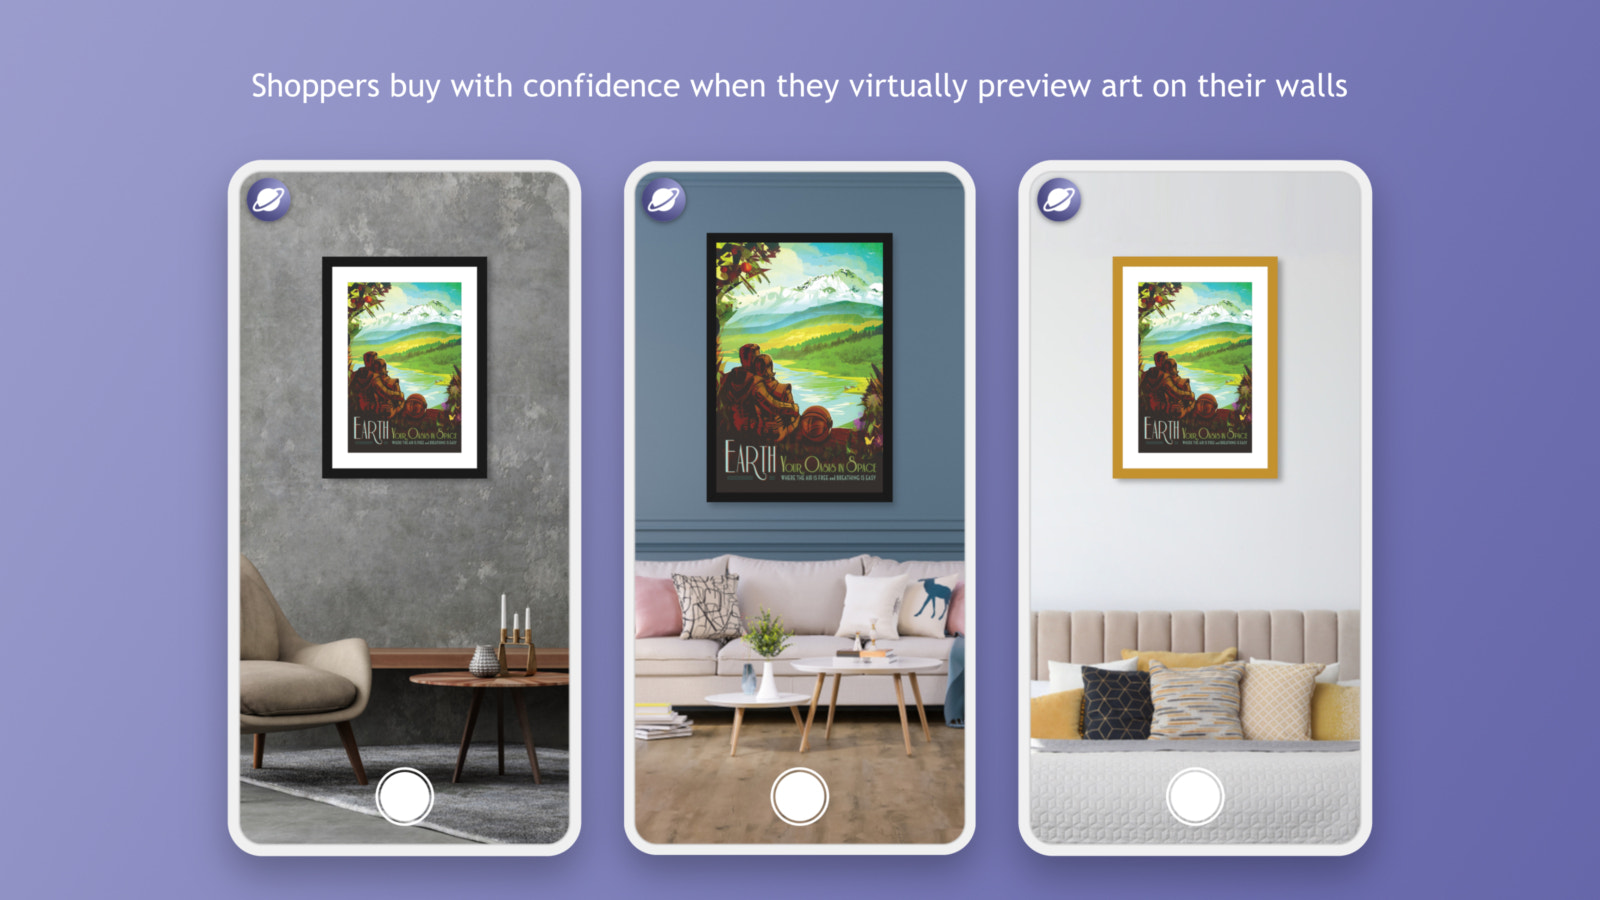 Shoppers buy with confidence when they virtually preview art